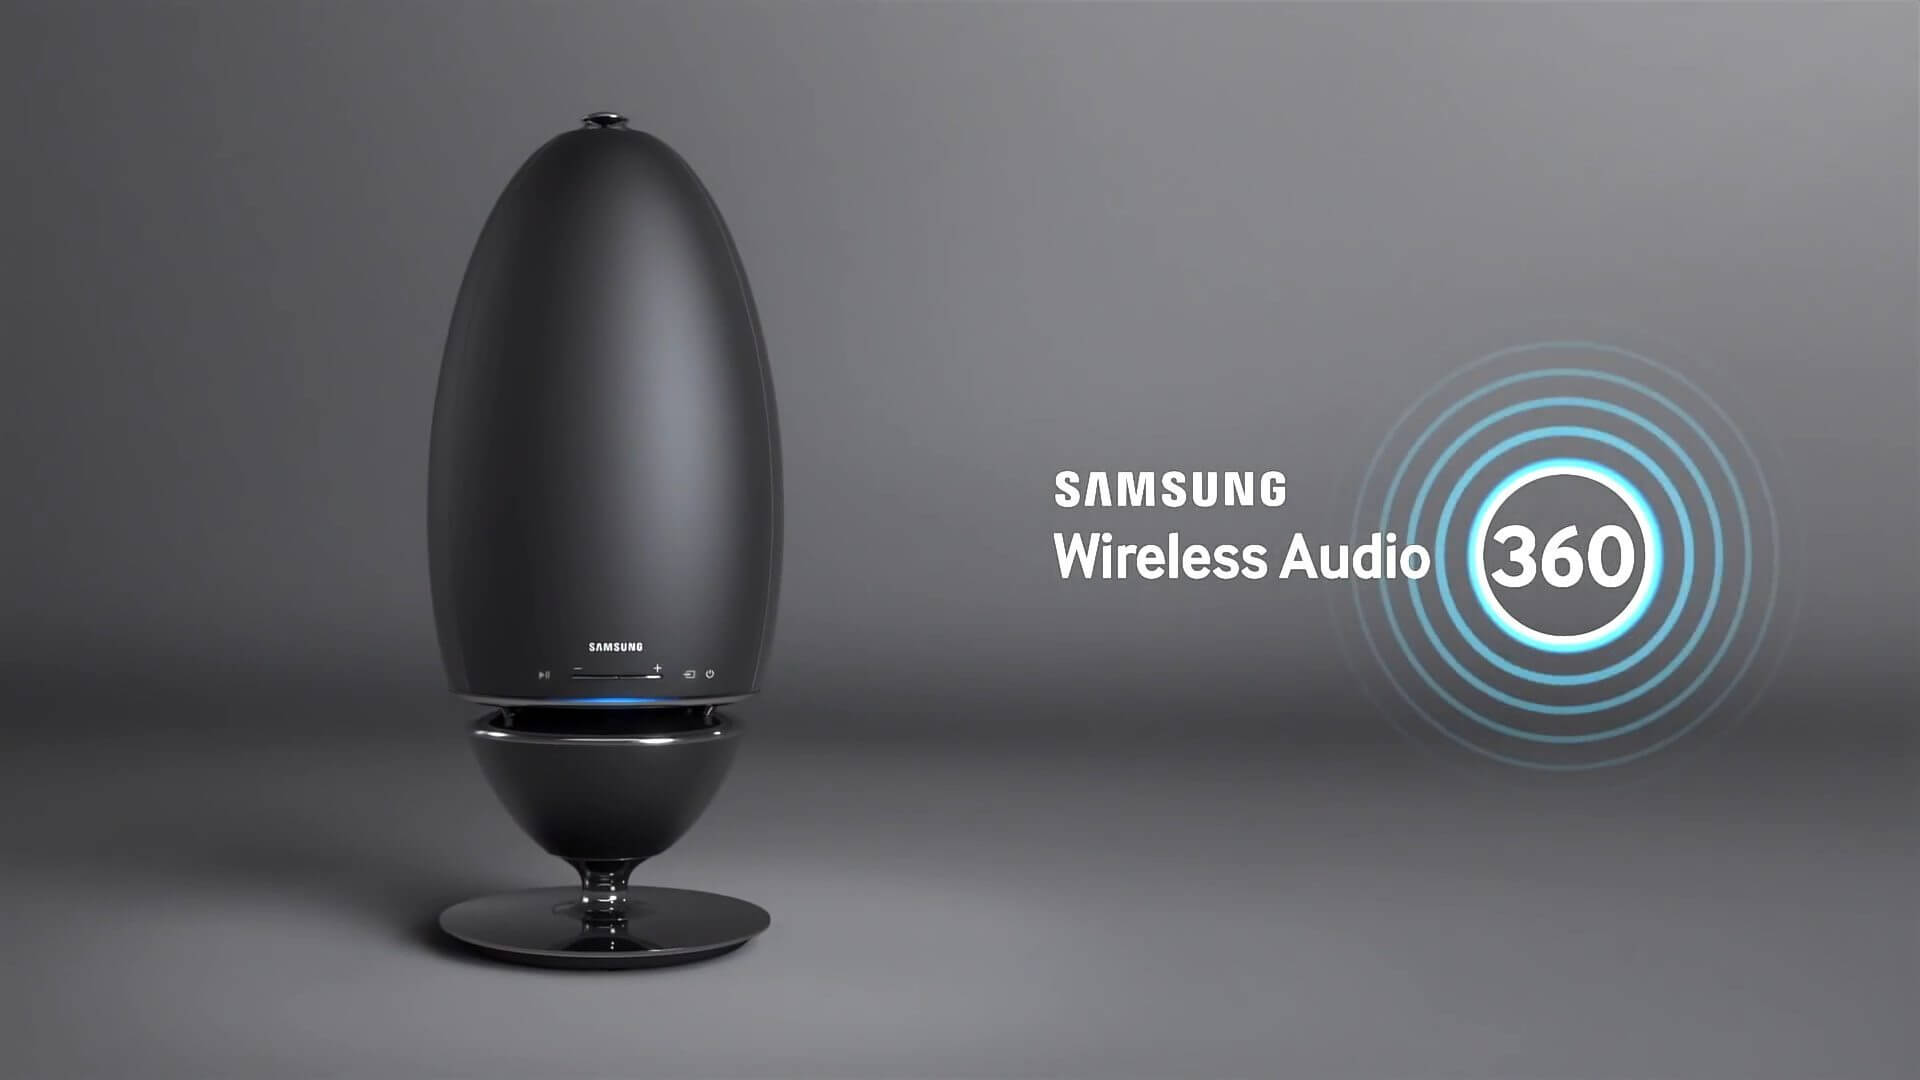 Ever heard of 360 degree sound? Check out Wireless Audio 360, Samsung's new release